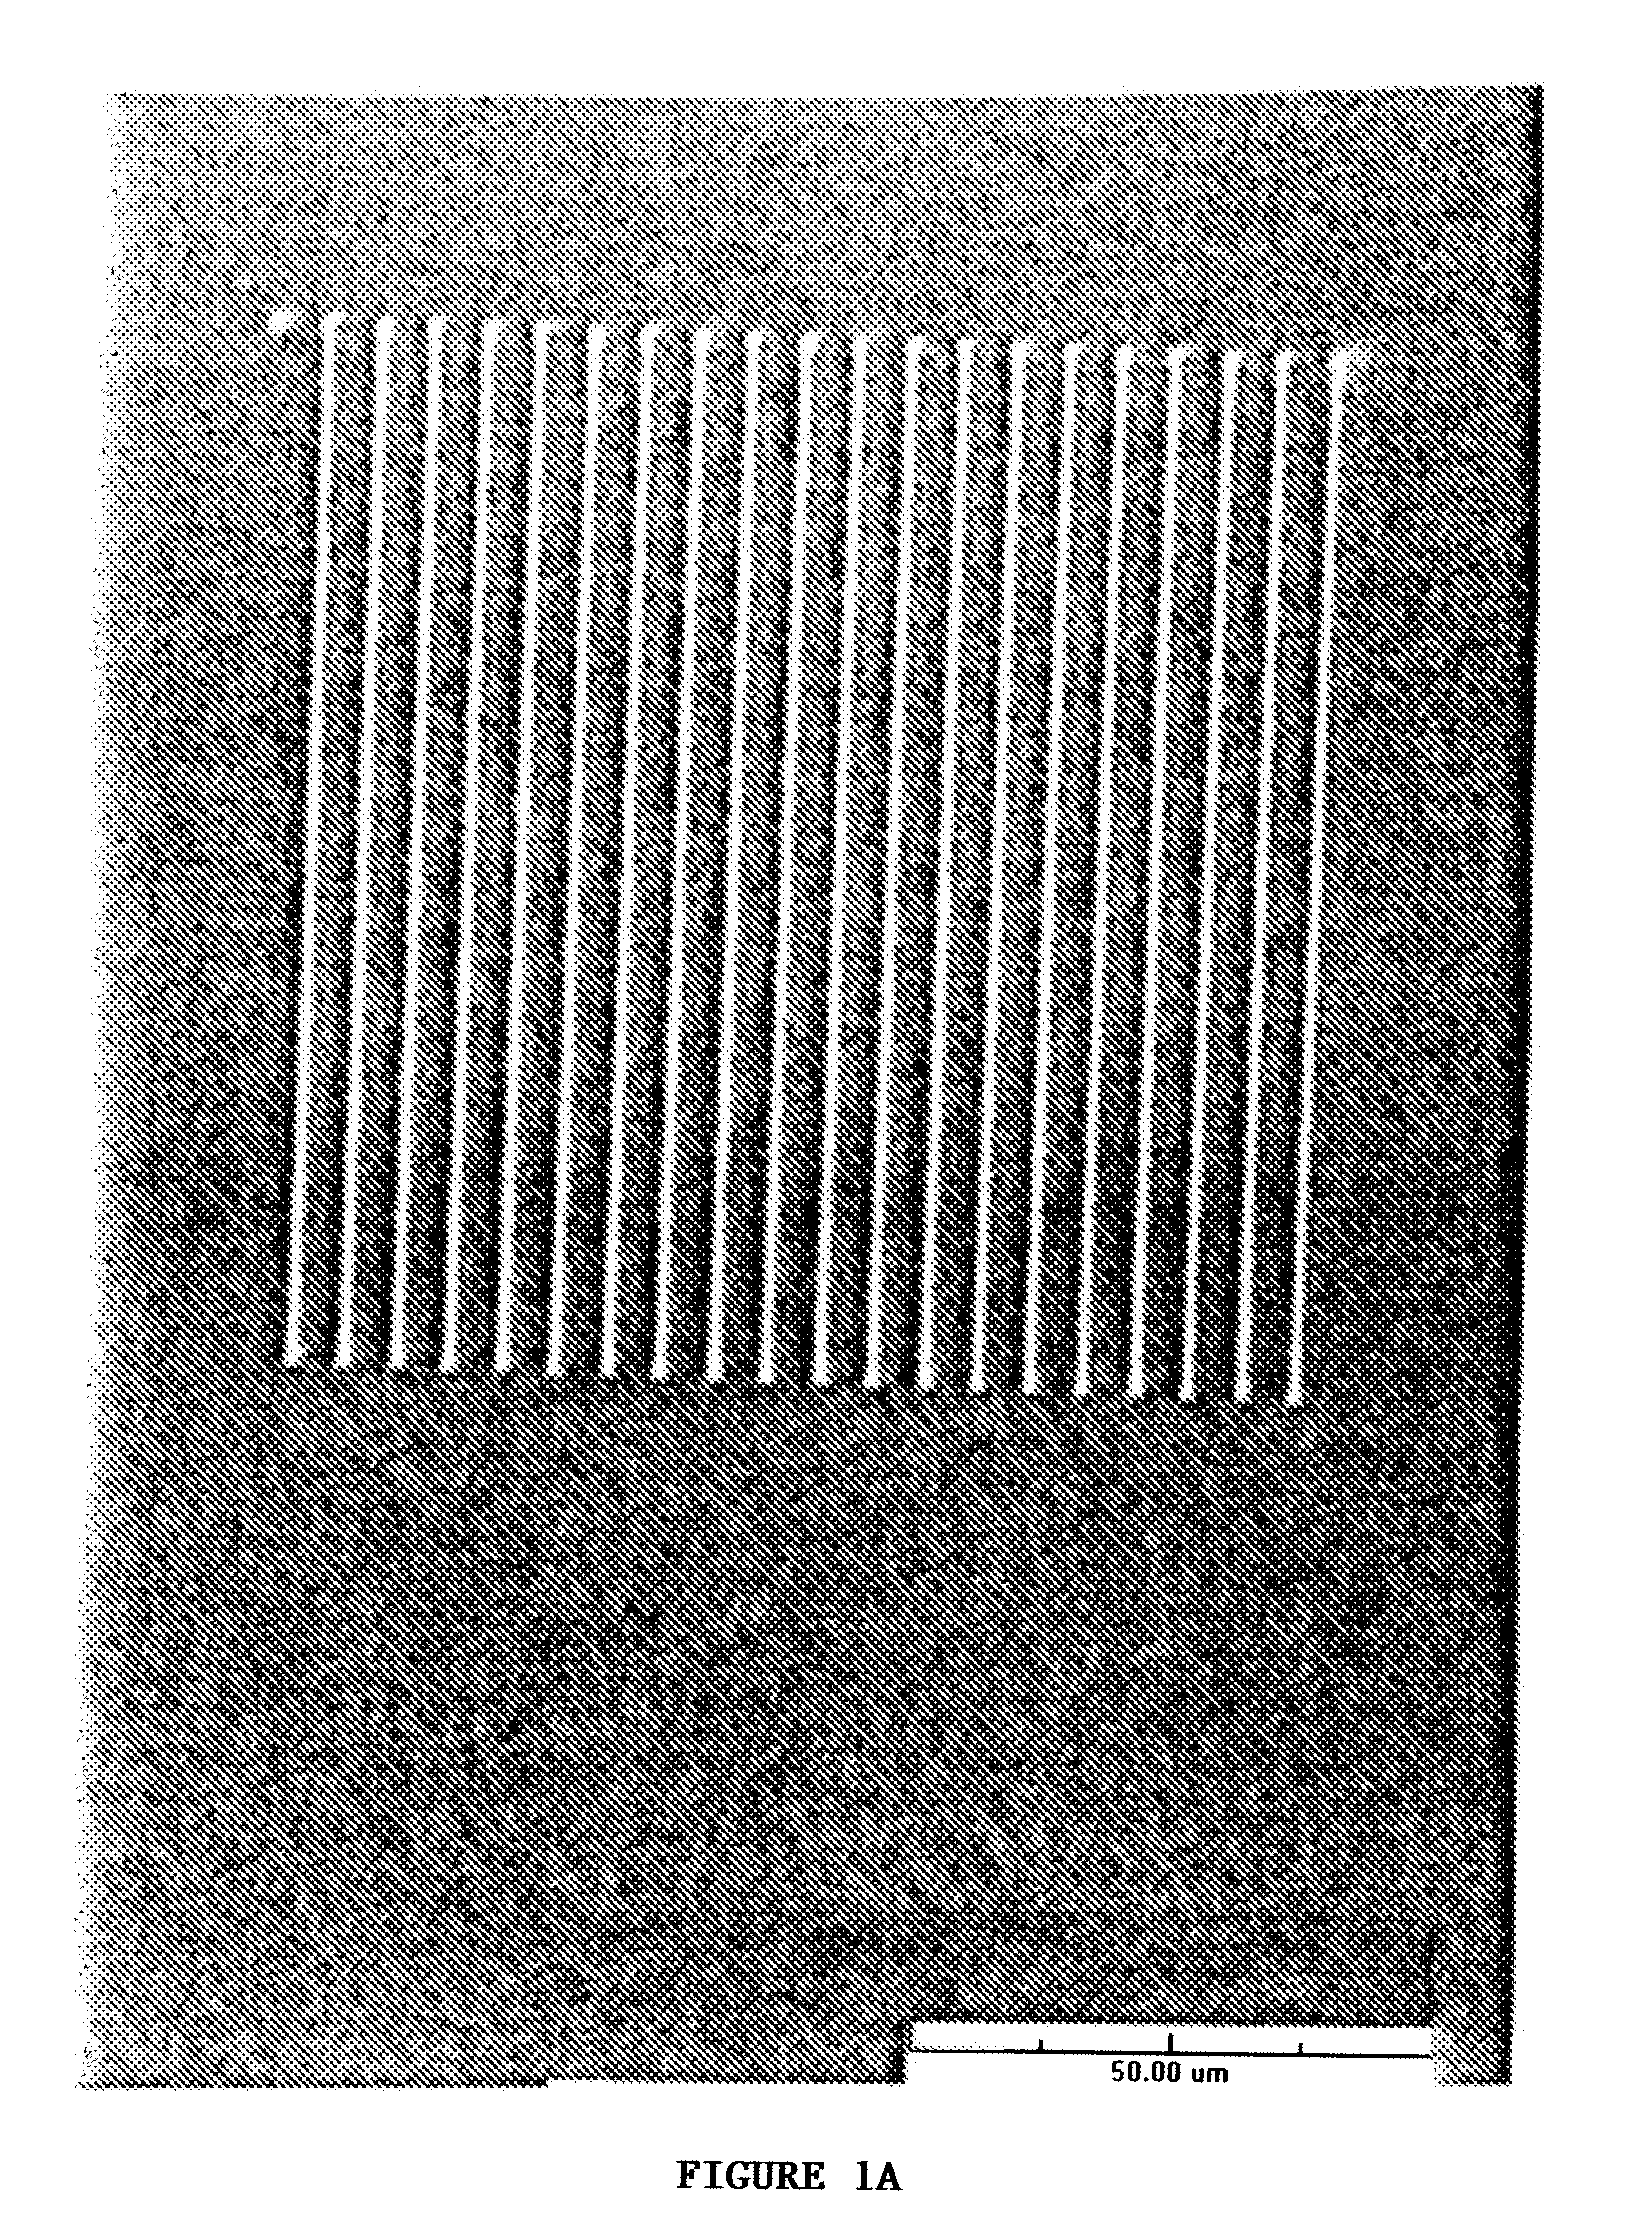 Method for modifying the refractive index of an optical material